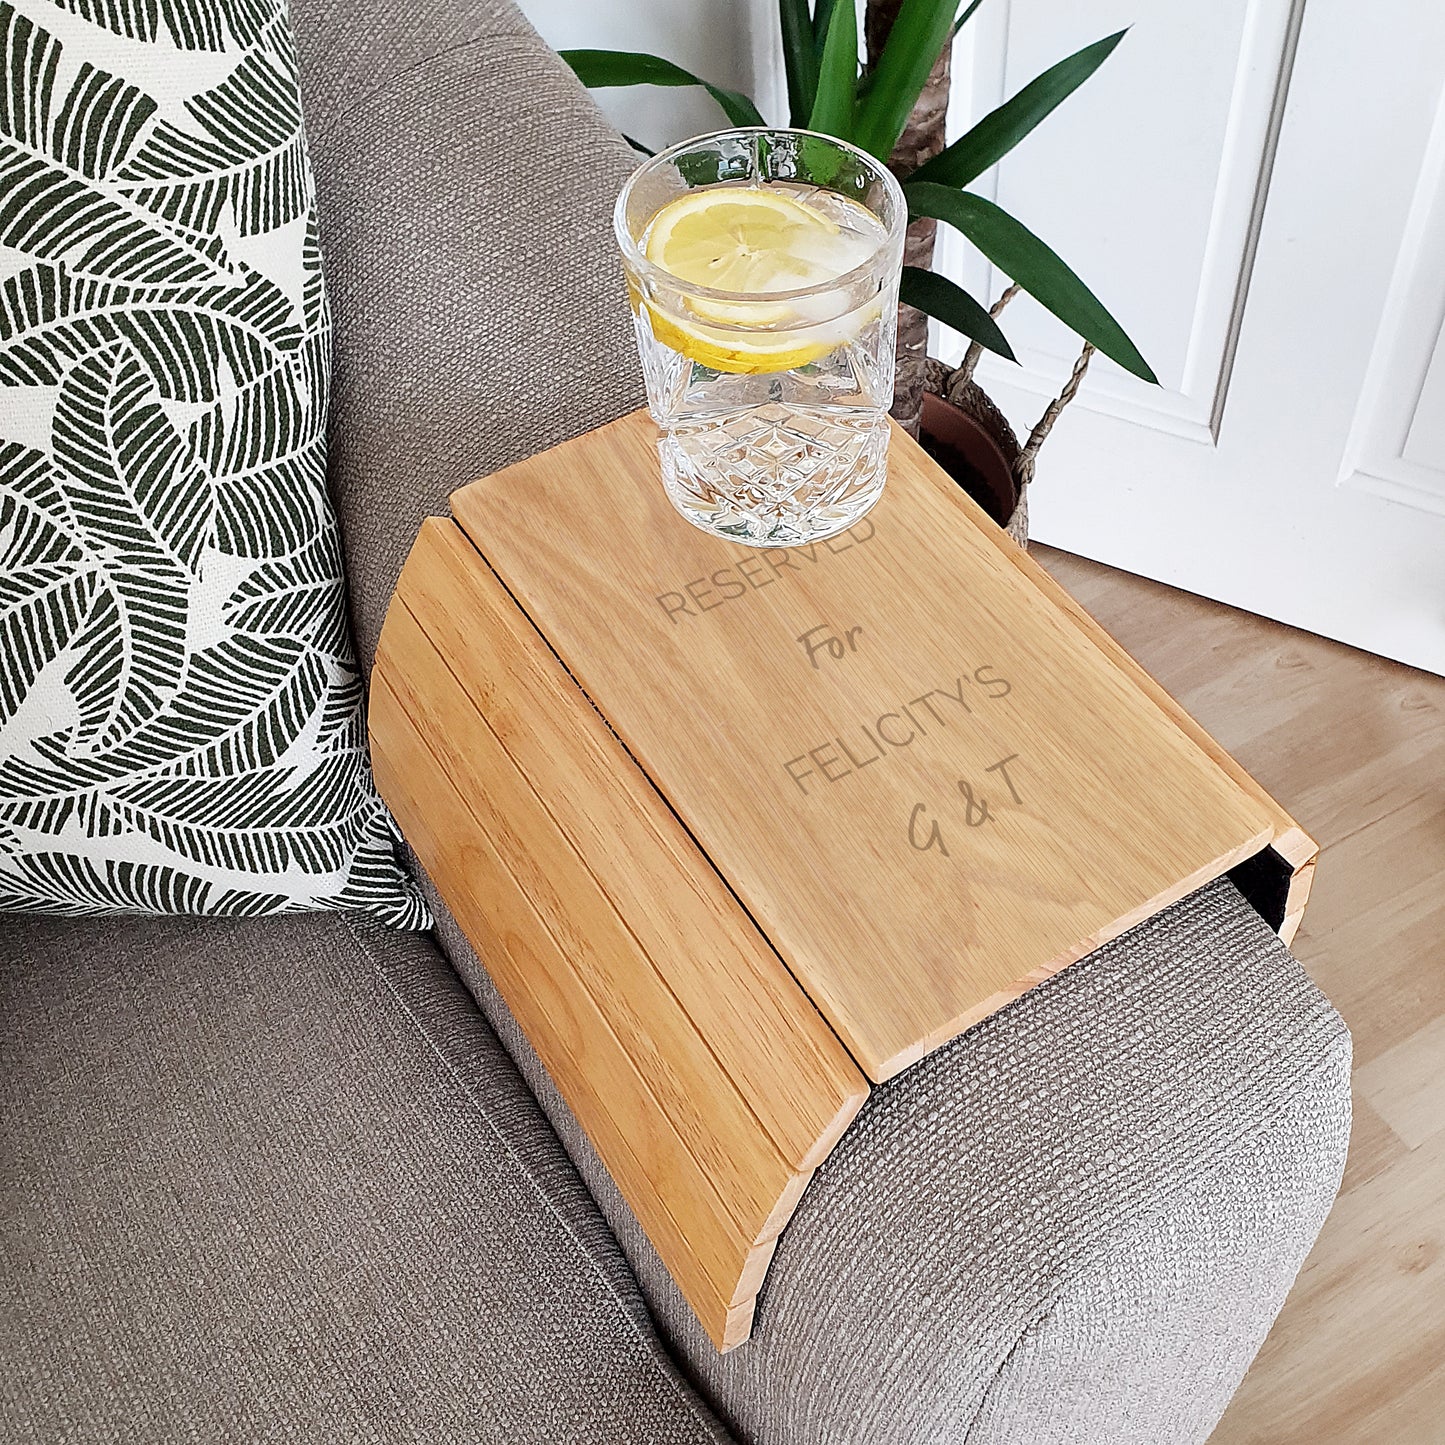 Sofa Table Tray: free text - Lilybet loves